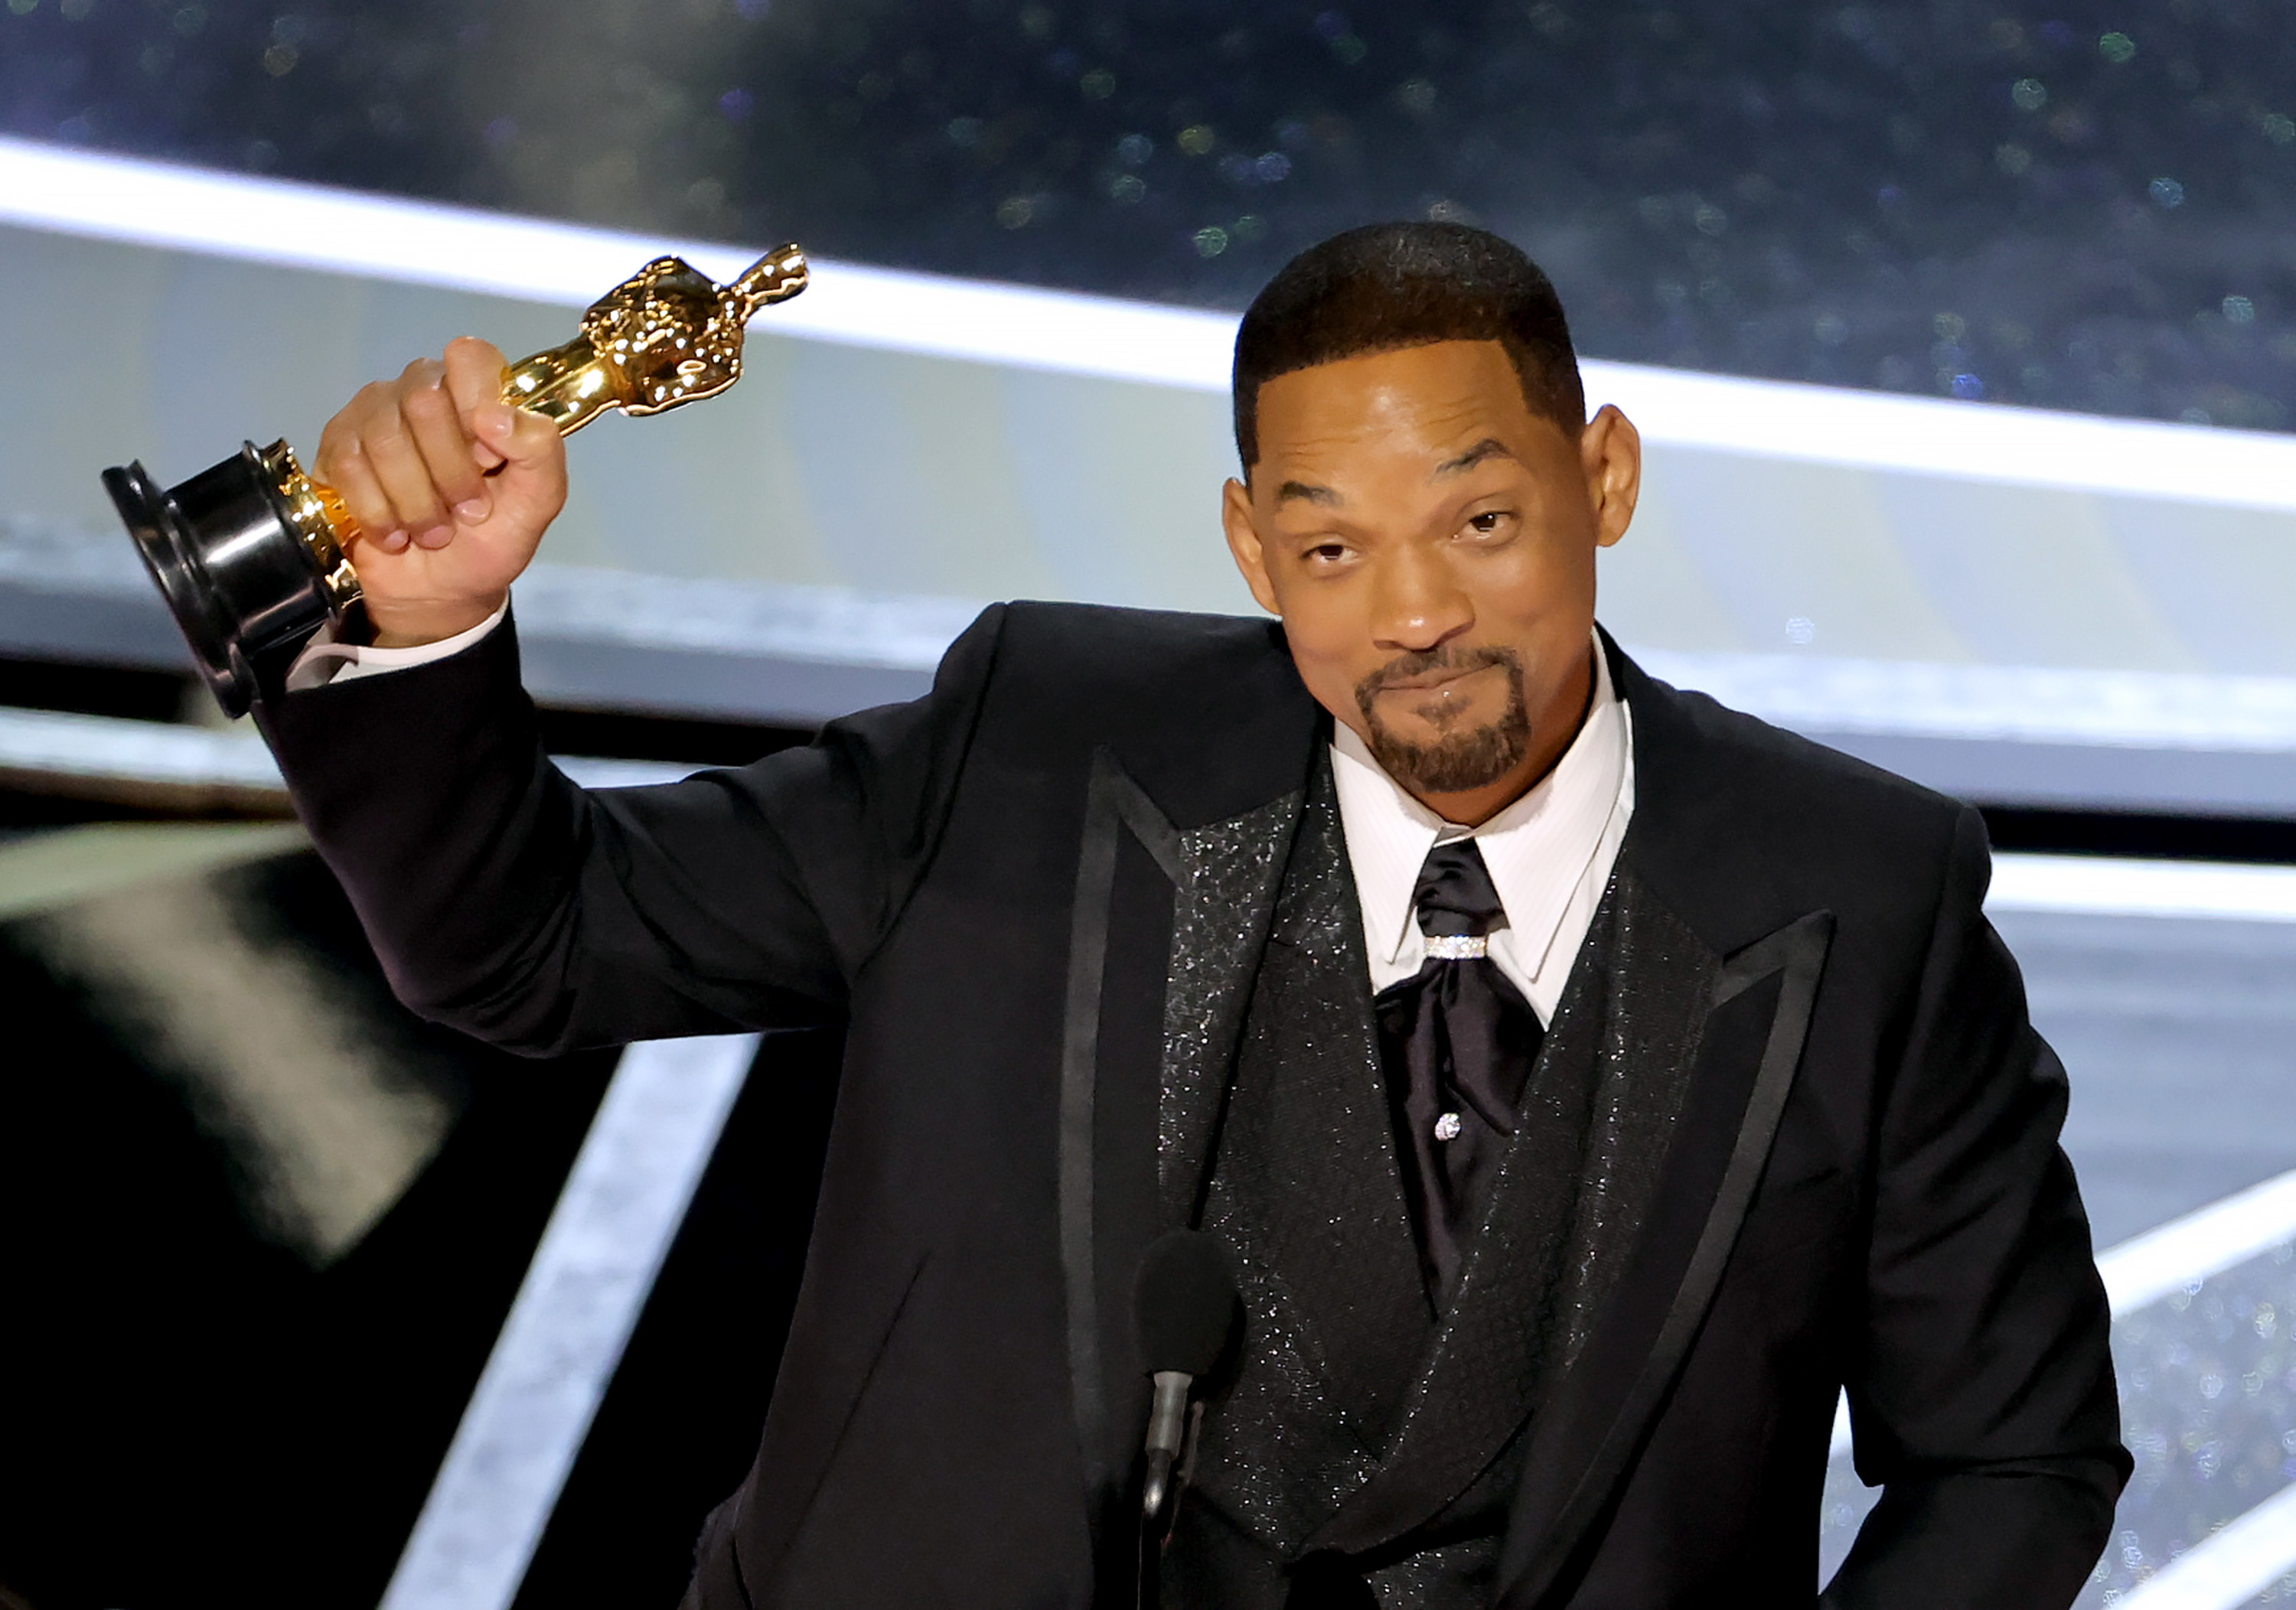 Will holding up his Oscar onstage at the podium